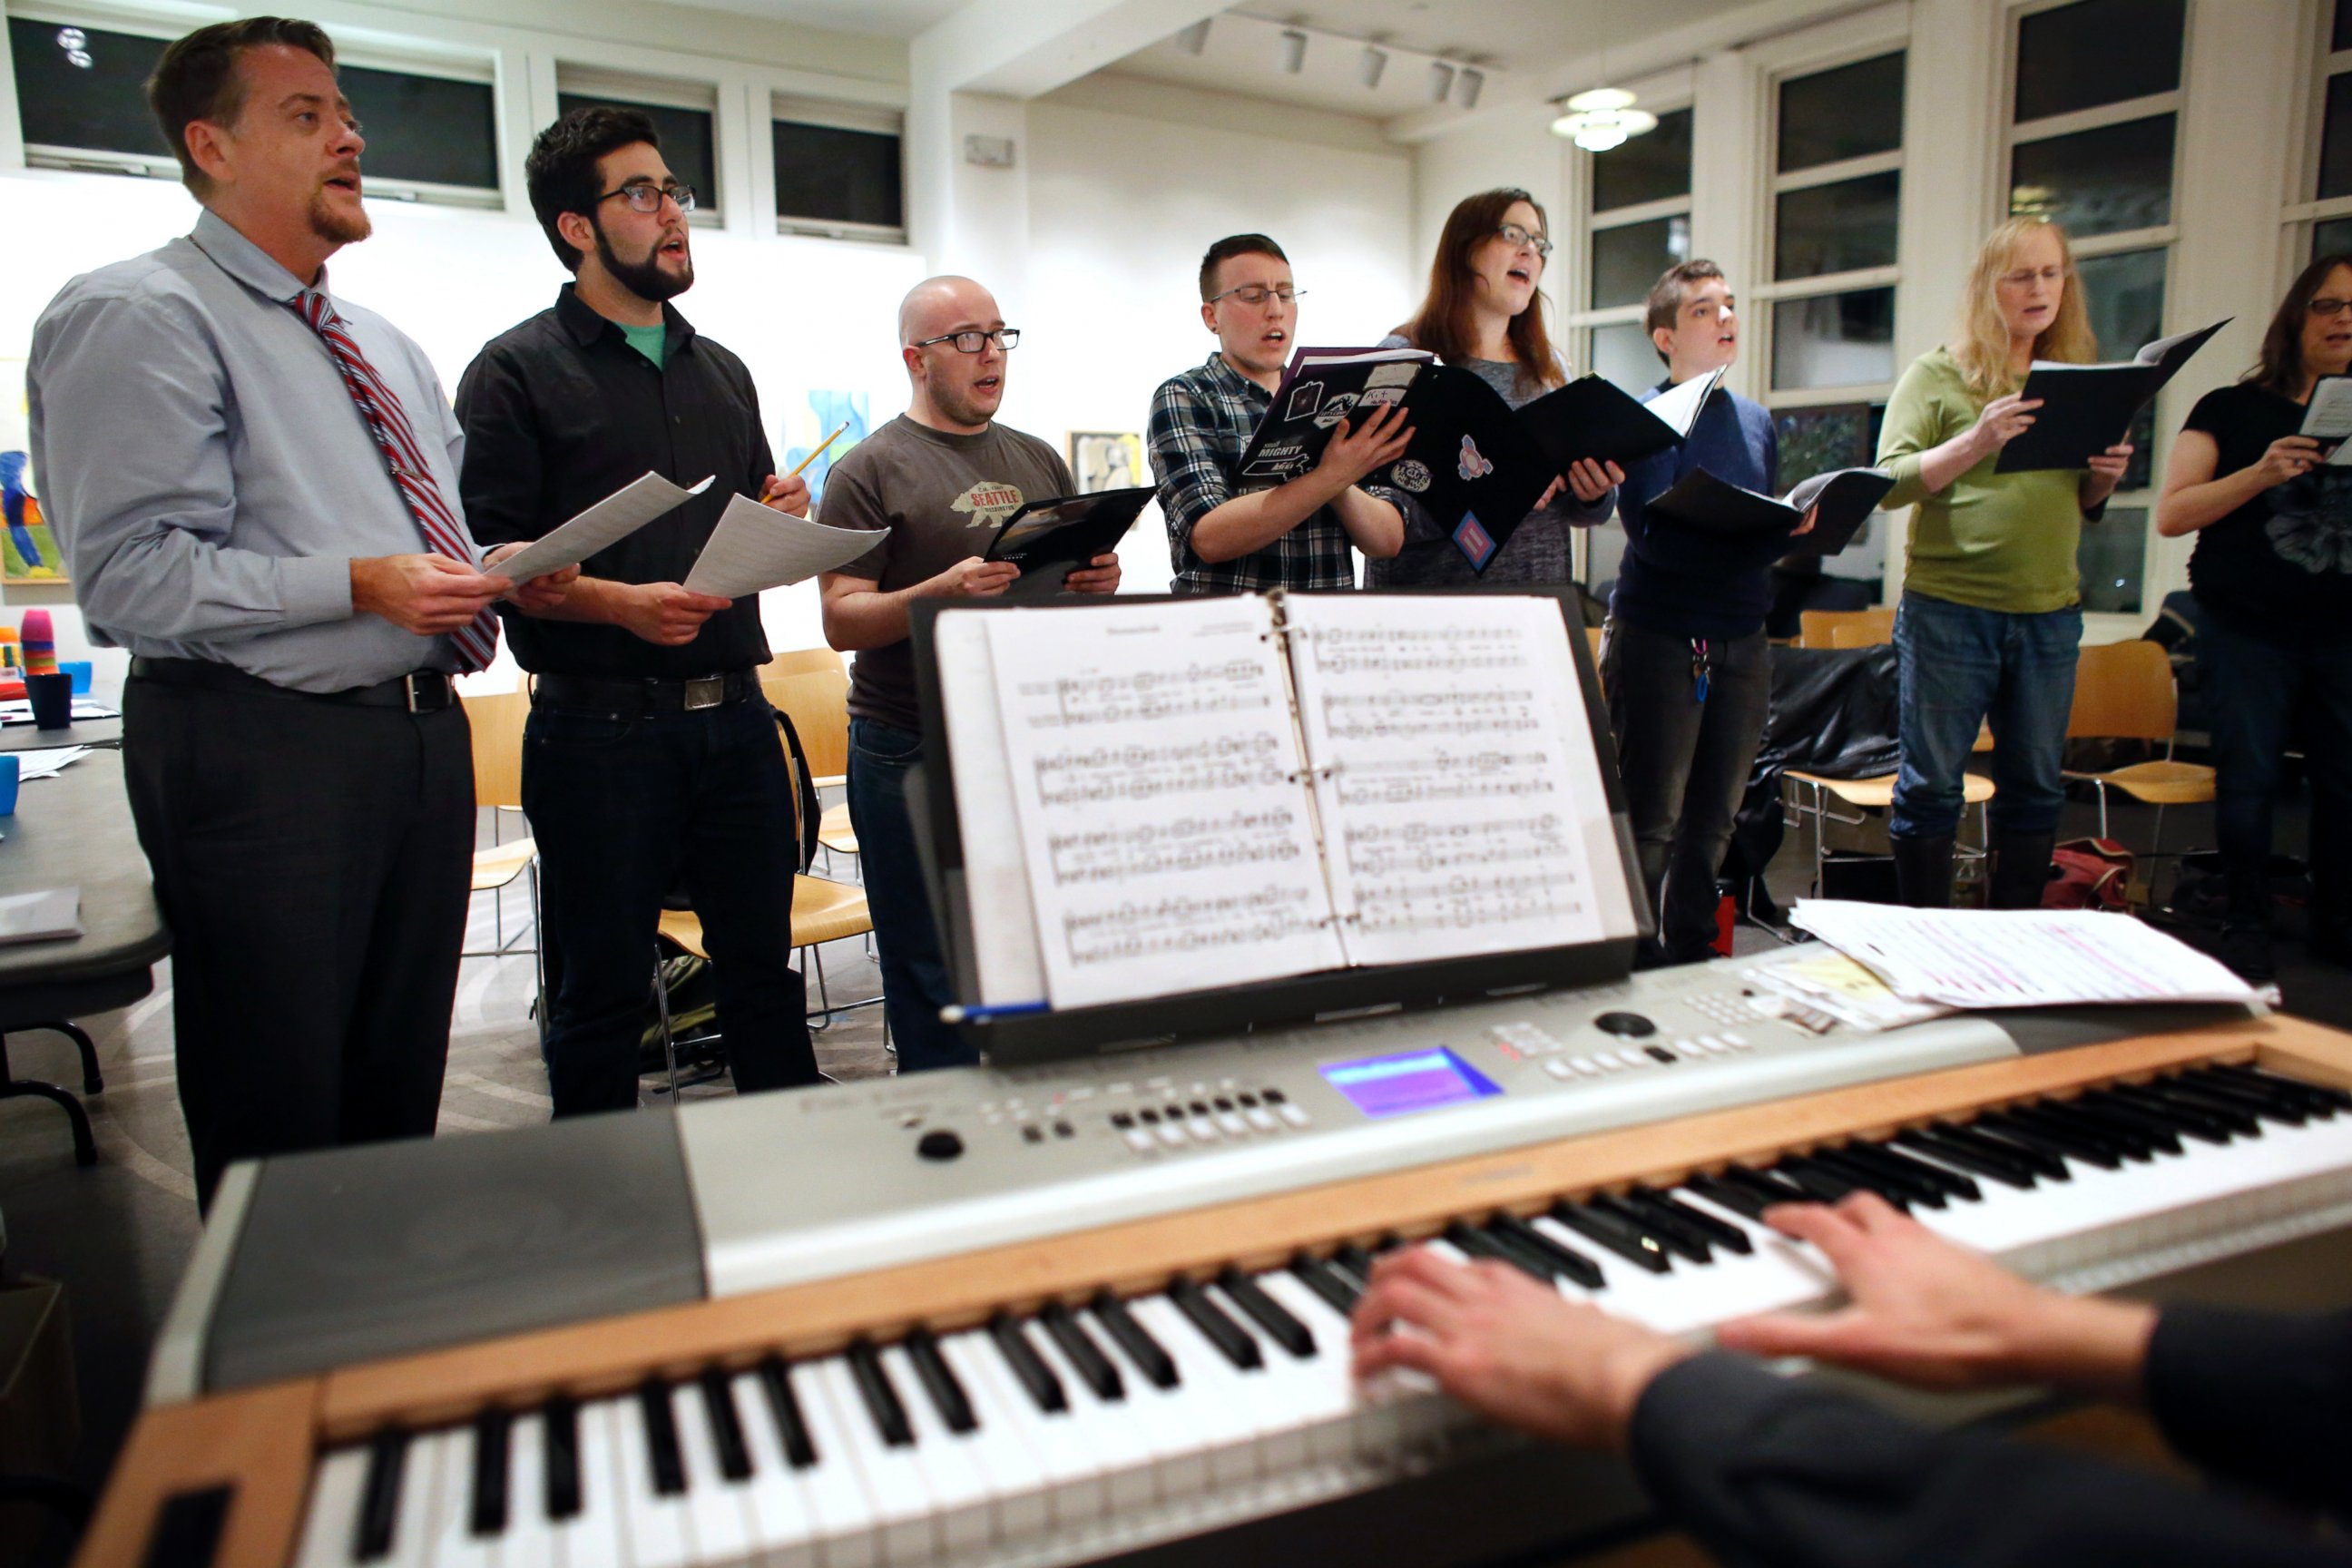 PHOTO: Members of the Butterfly Music Transgender Chorus sing during a rehearsal at a church in Cambridge, Mass on Oct. 7, 2015.